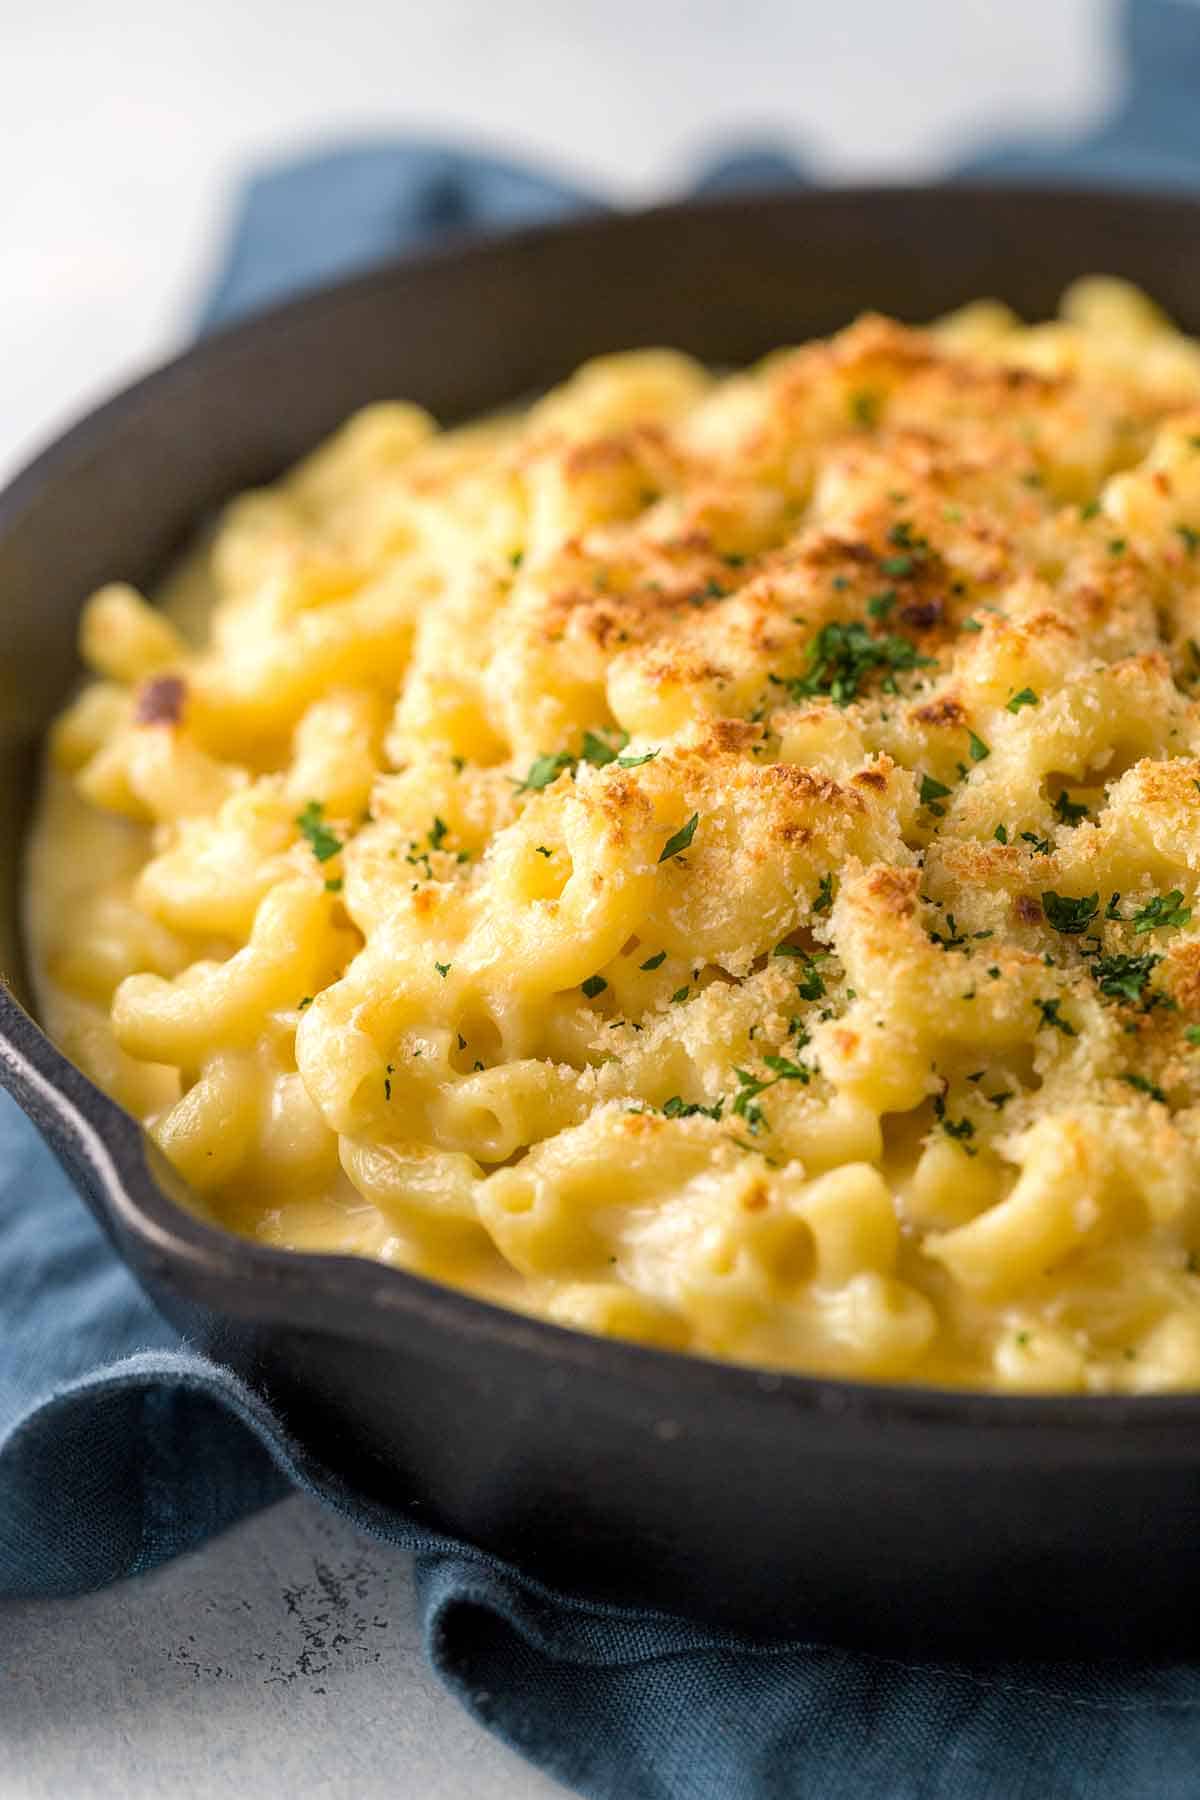 Best Flavor Cheese For Homemade Mac And Cheese